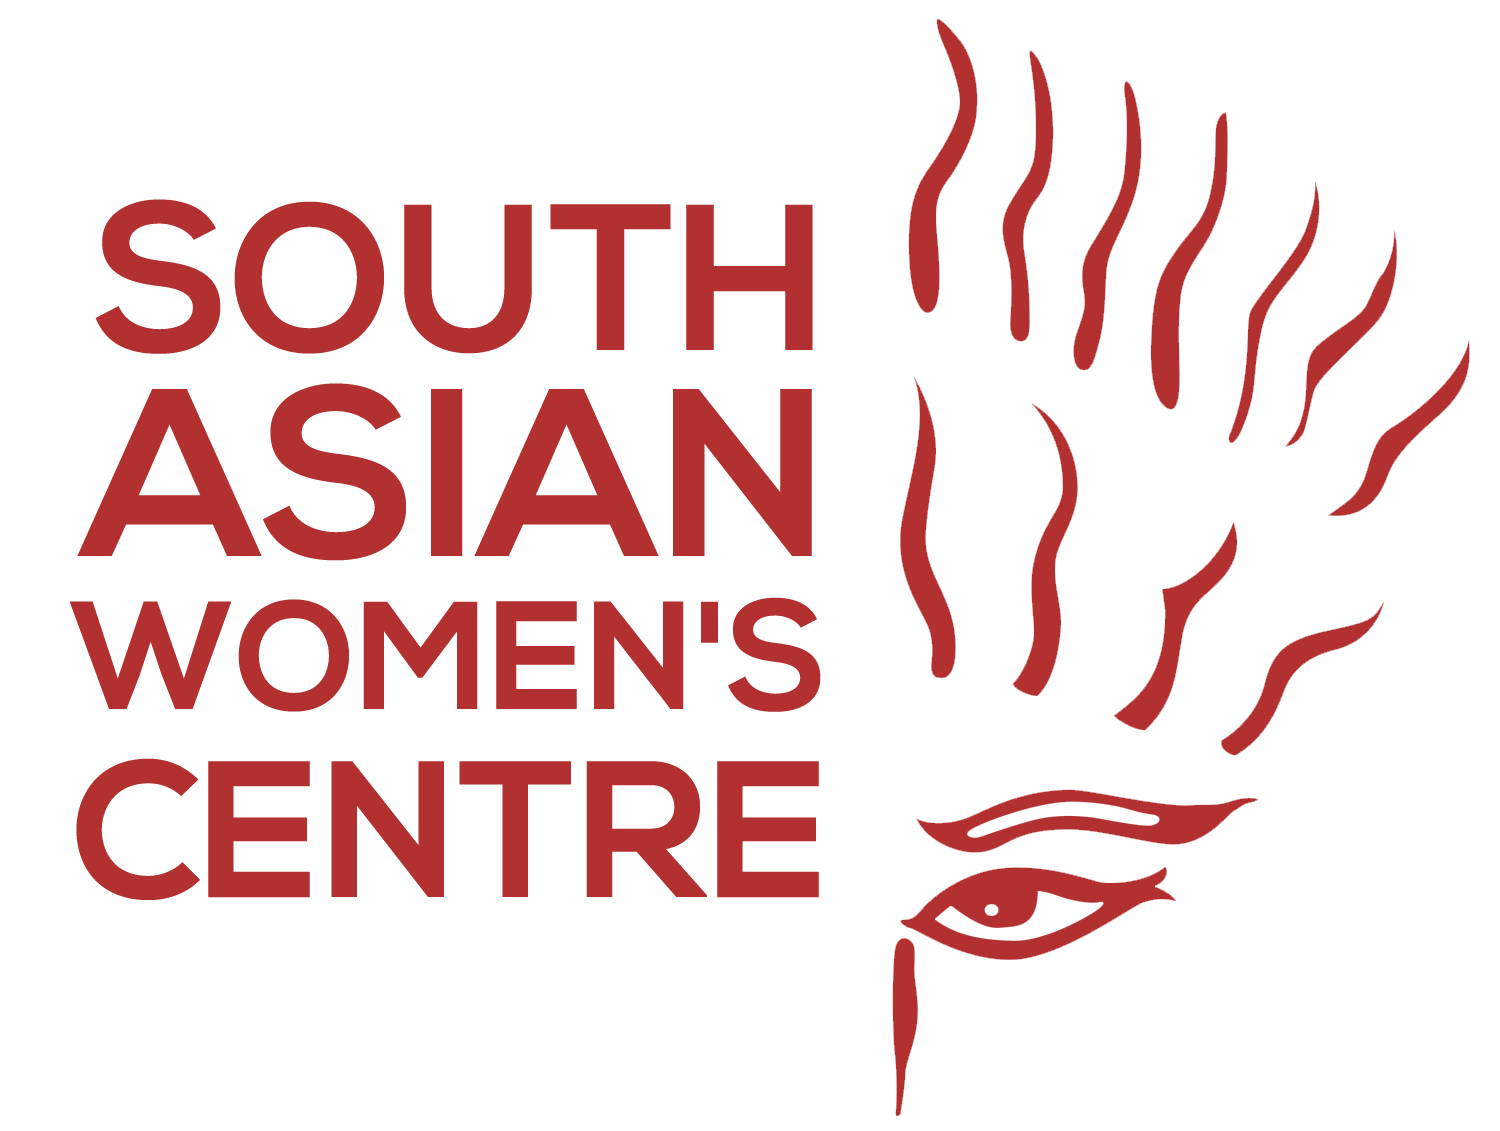 Spotlighting South Asian NGOs: Catalysts for Global Change - South Asian Women's Centre. 